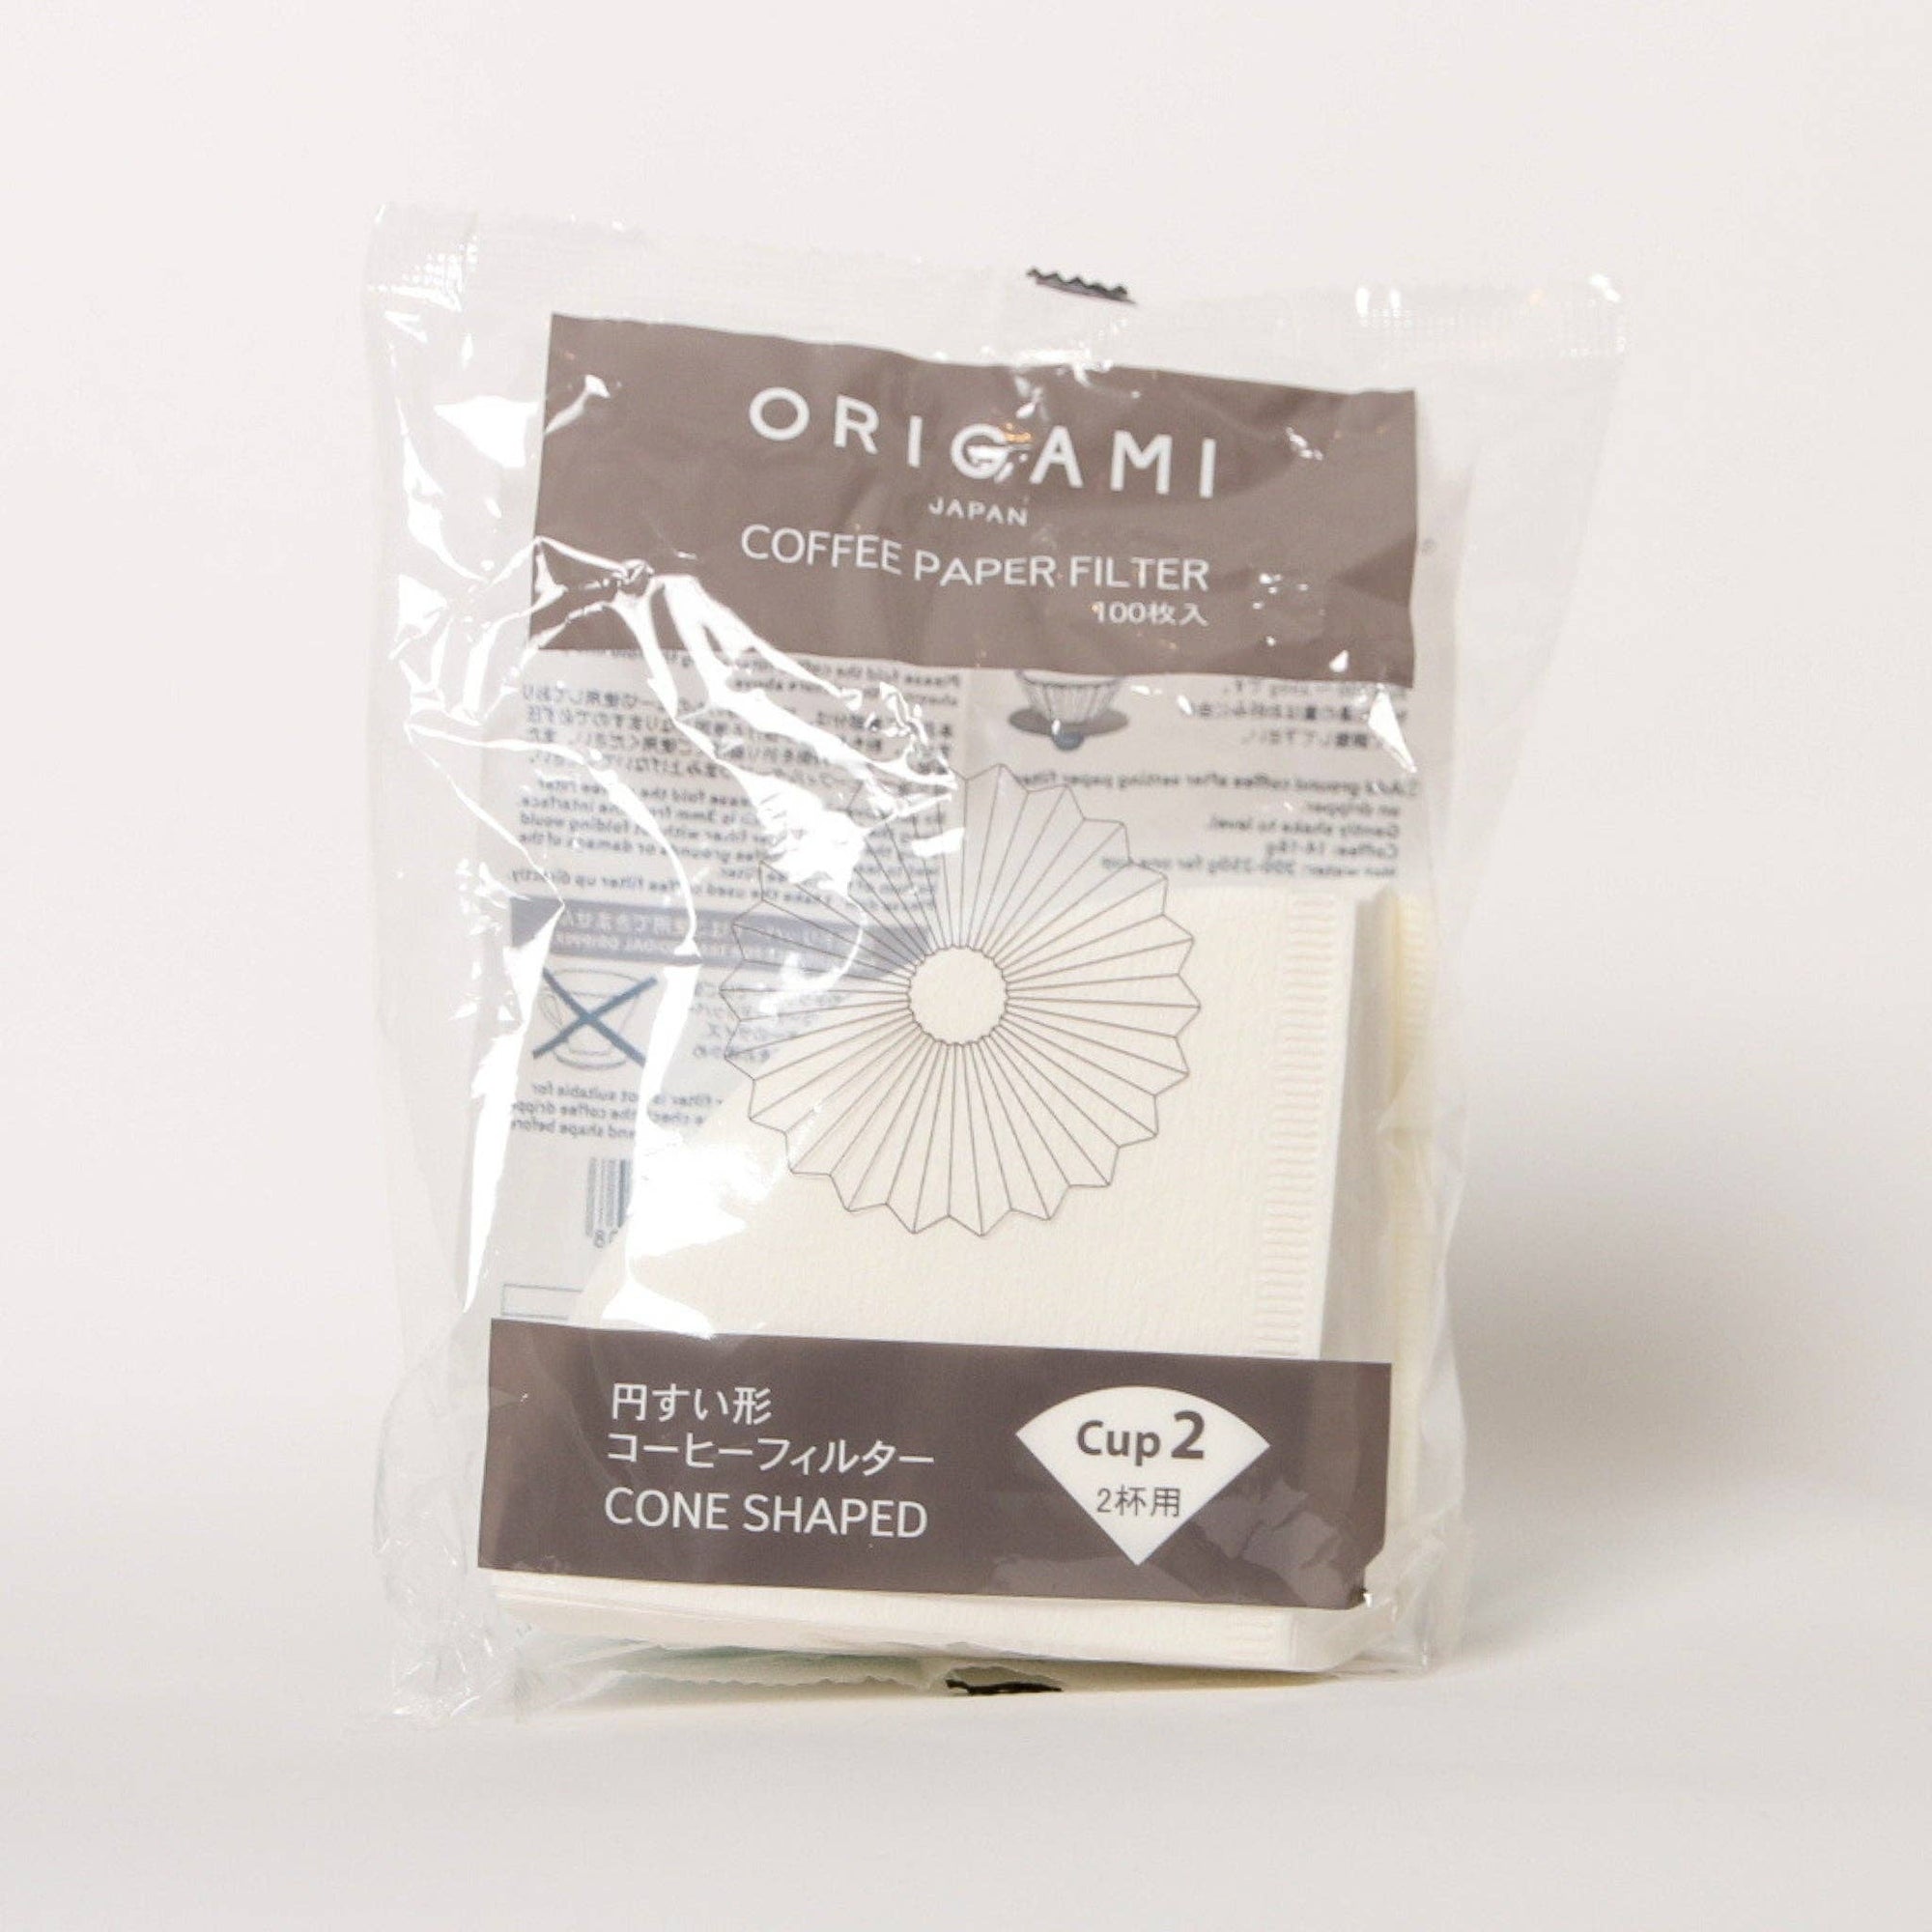 ORIGAMI Original Pour Over Coffee Paper Filter - Space Camp